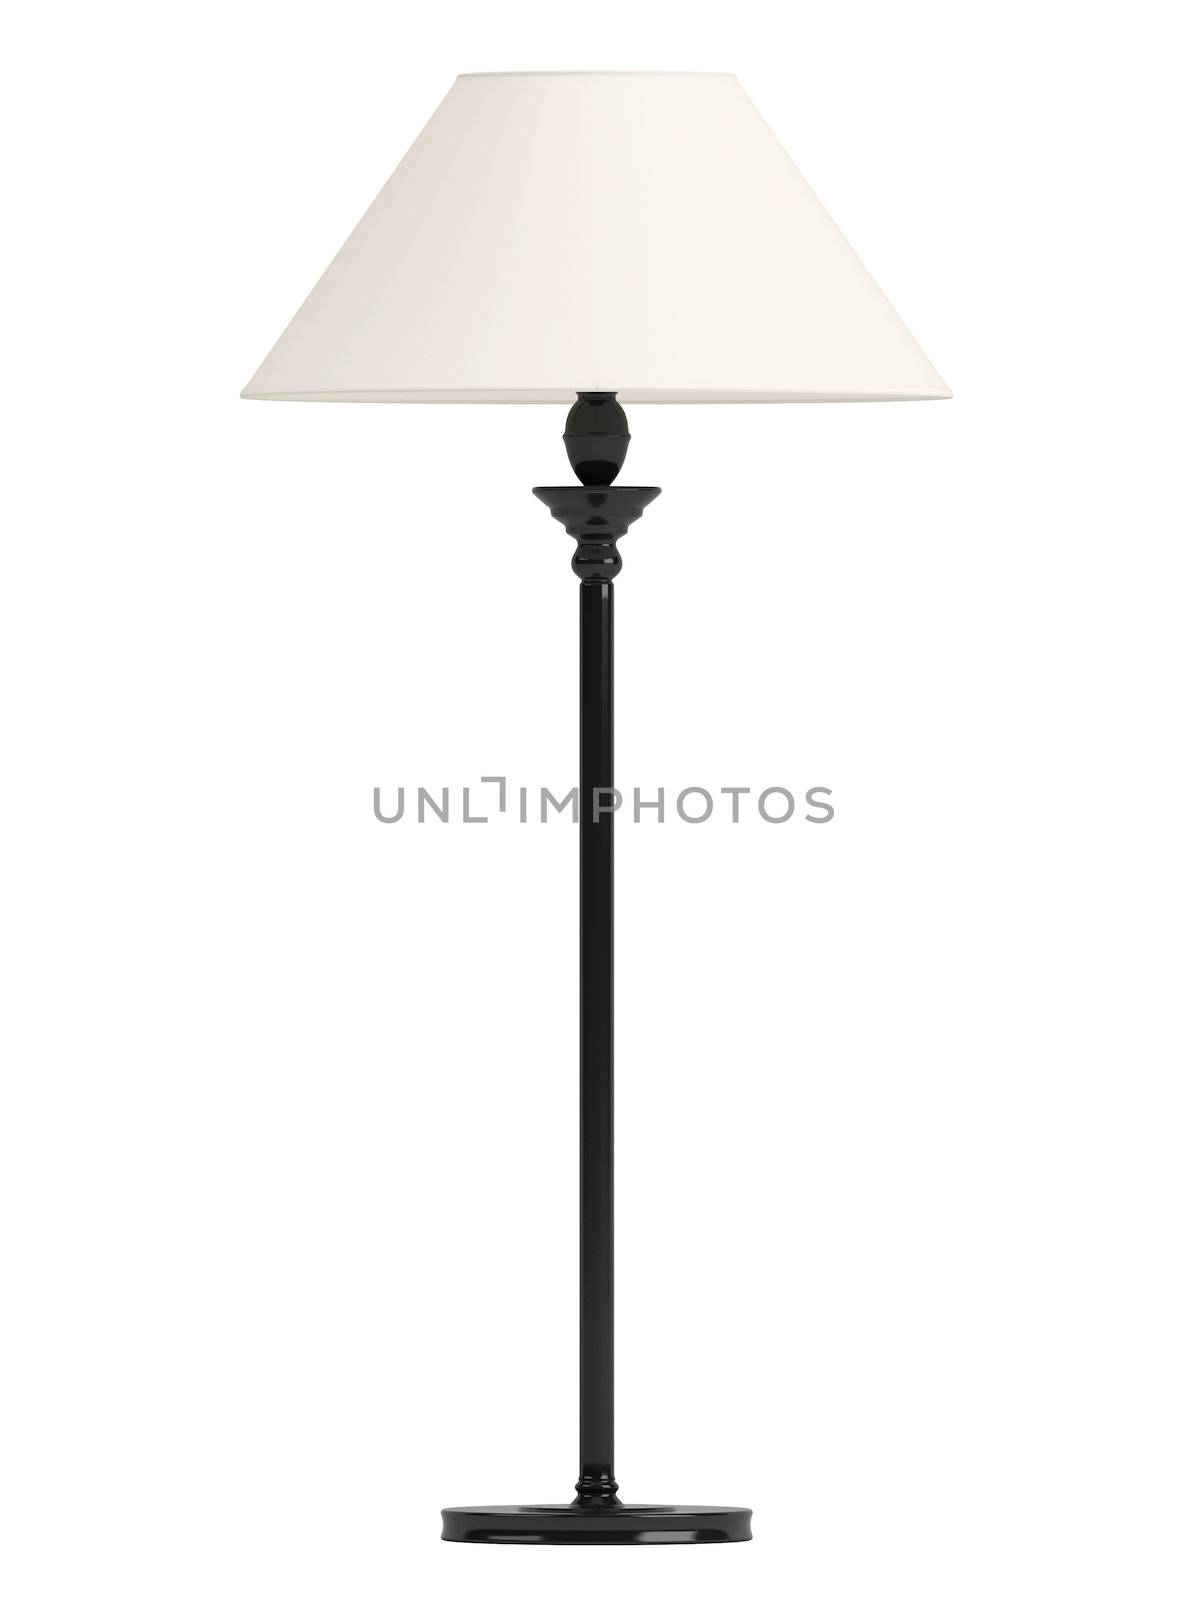 Classic standing lamp with a black base and white shade isolated on white